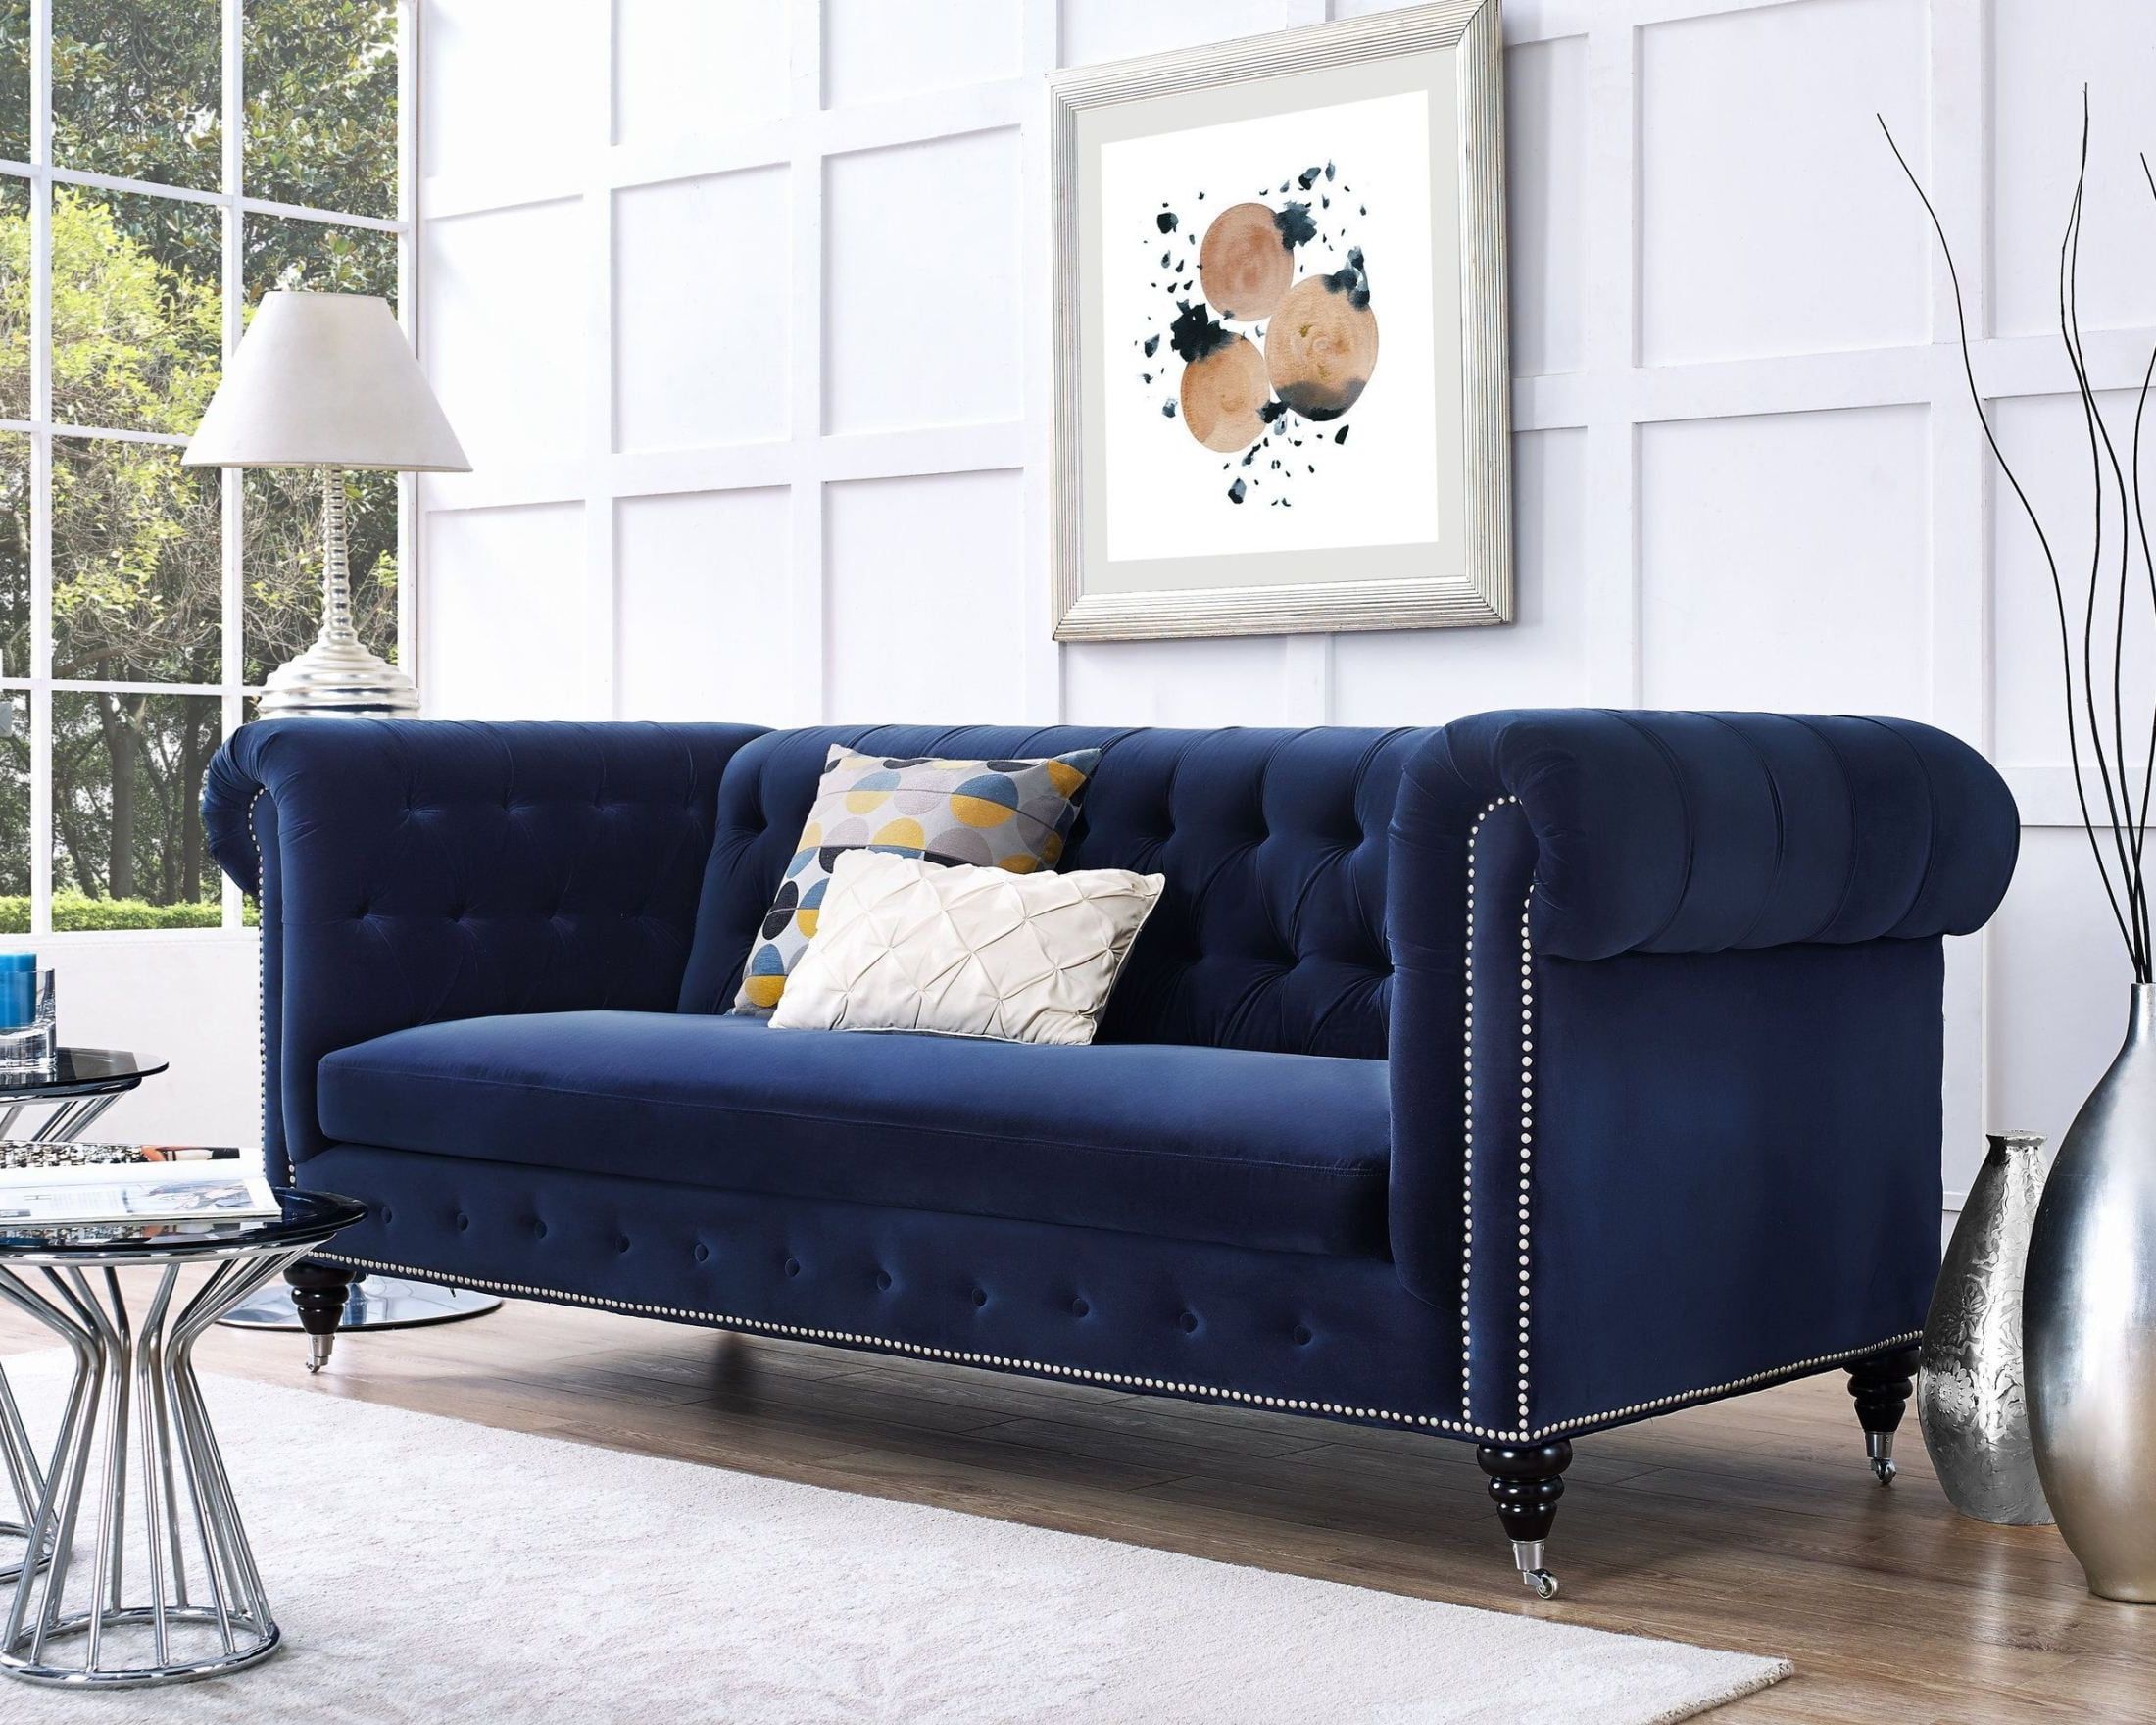 Hanny Navy Blue Velvet Sofa From Tov | Coleman Furniture Intended For Sofas In Blue (View 13 of 20)